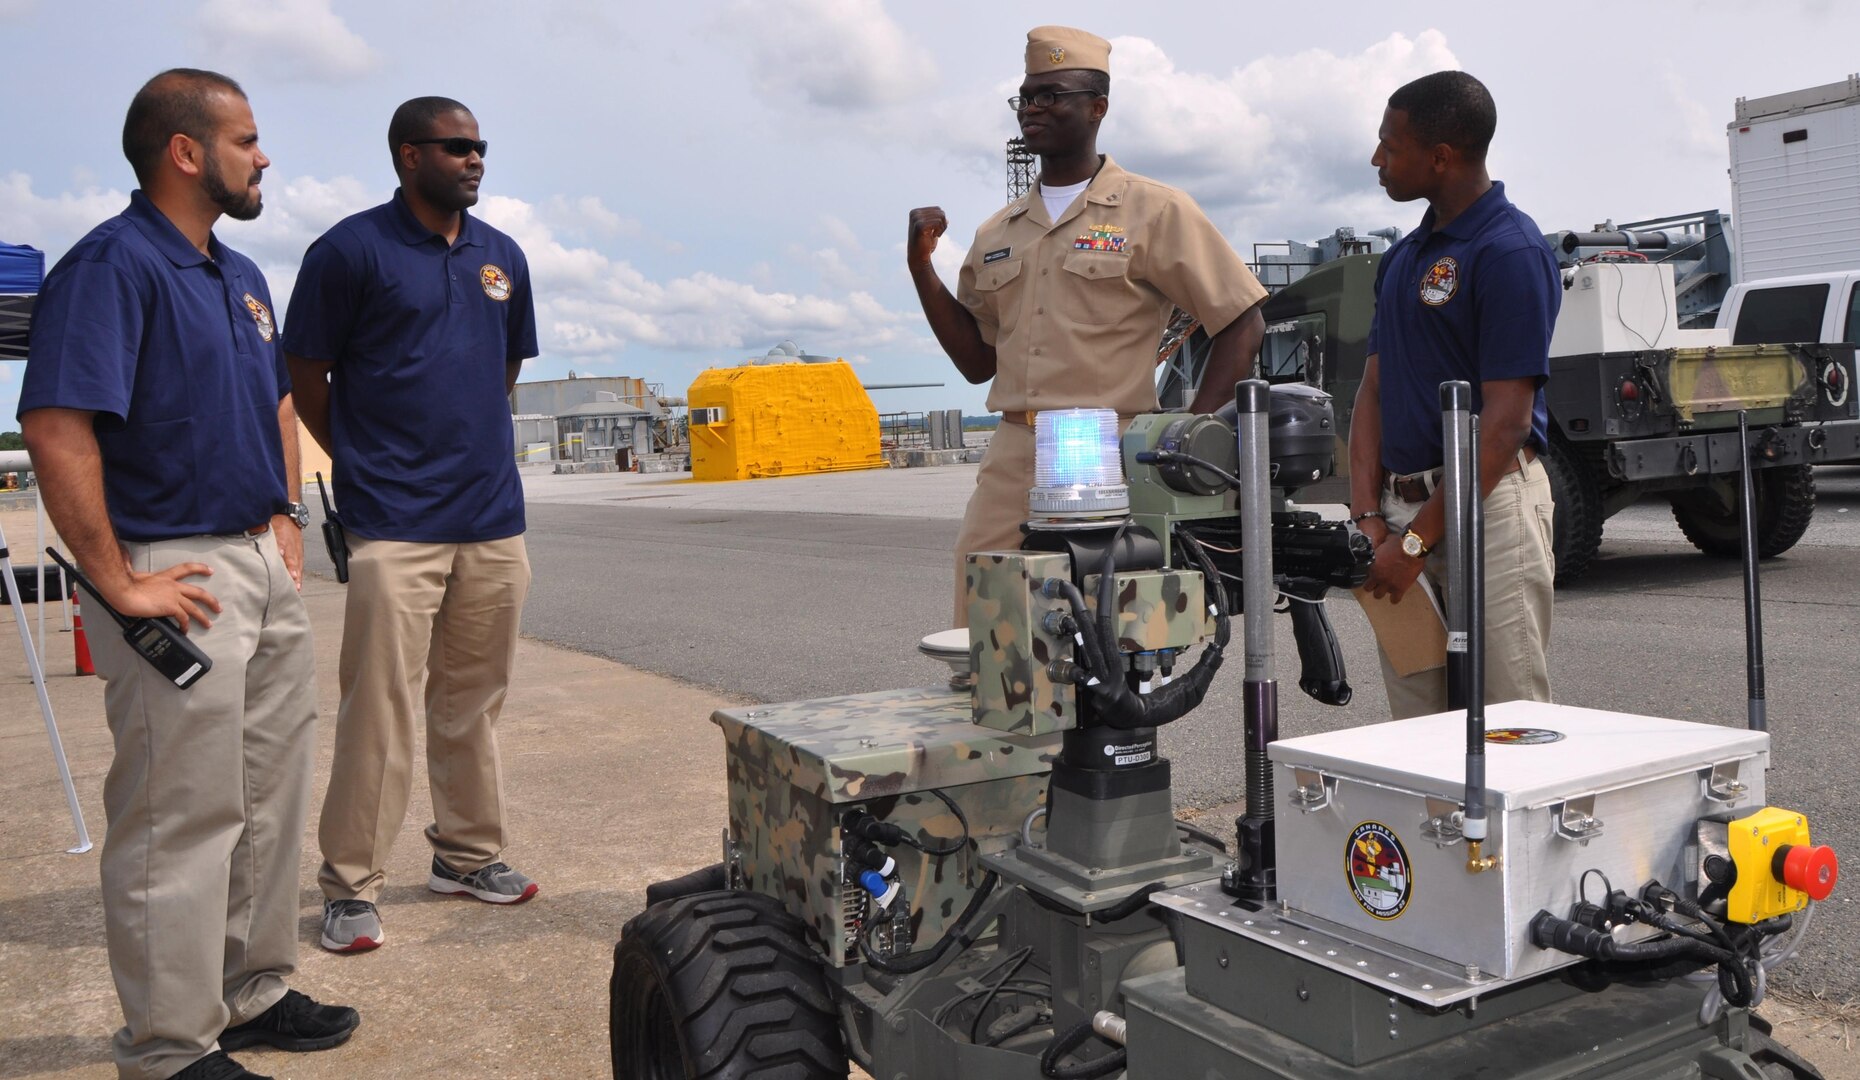 IMAGE: DAHLGREN, Va. (Sept. 12, 2017) - Navy Sly Fox Mission 22 junior scientists and engineers brief Lt. Akwasi Fosu on the new capabilities of Weaponized Autonomous System Prototype (WASP) after a demonstration held at Naval Surface Warfare Center Dahlgren Division.  The seven-member Mission 22 team integrated WASP with an unmanned aerial vehicle (UAV) to provide an aerial perspective for increased situational awareness. Navy civilian and military personnel witnessed the Mission 22 demonstration of the Collaborative Aerial Network for the Autonomous Remote Engagement System – fully-integrated with the UAV, WASP, and a command and control station while detecting, tracking, and engaging targets on the Potomac River Test Range. Standing left to right are Jamshaid "JD" Chaudhry, Allen Woods, Fosu, and Chris Toney.